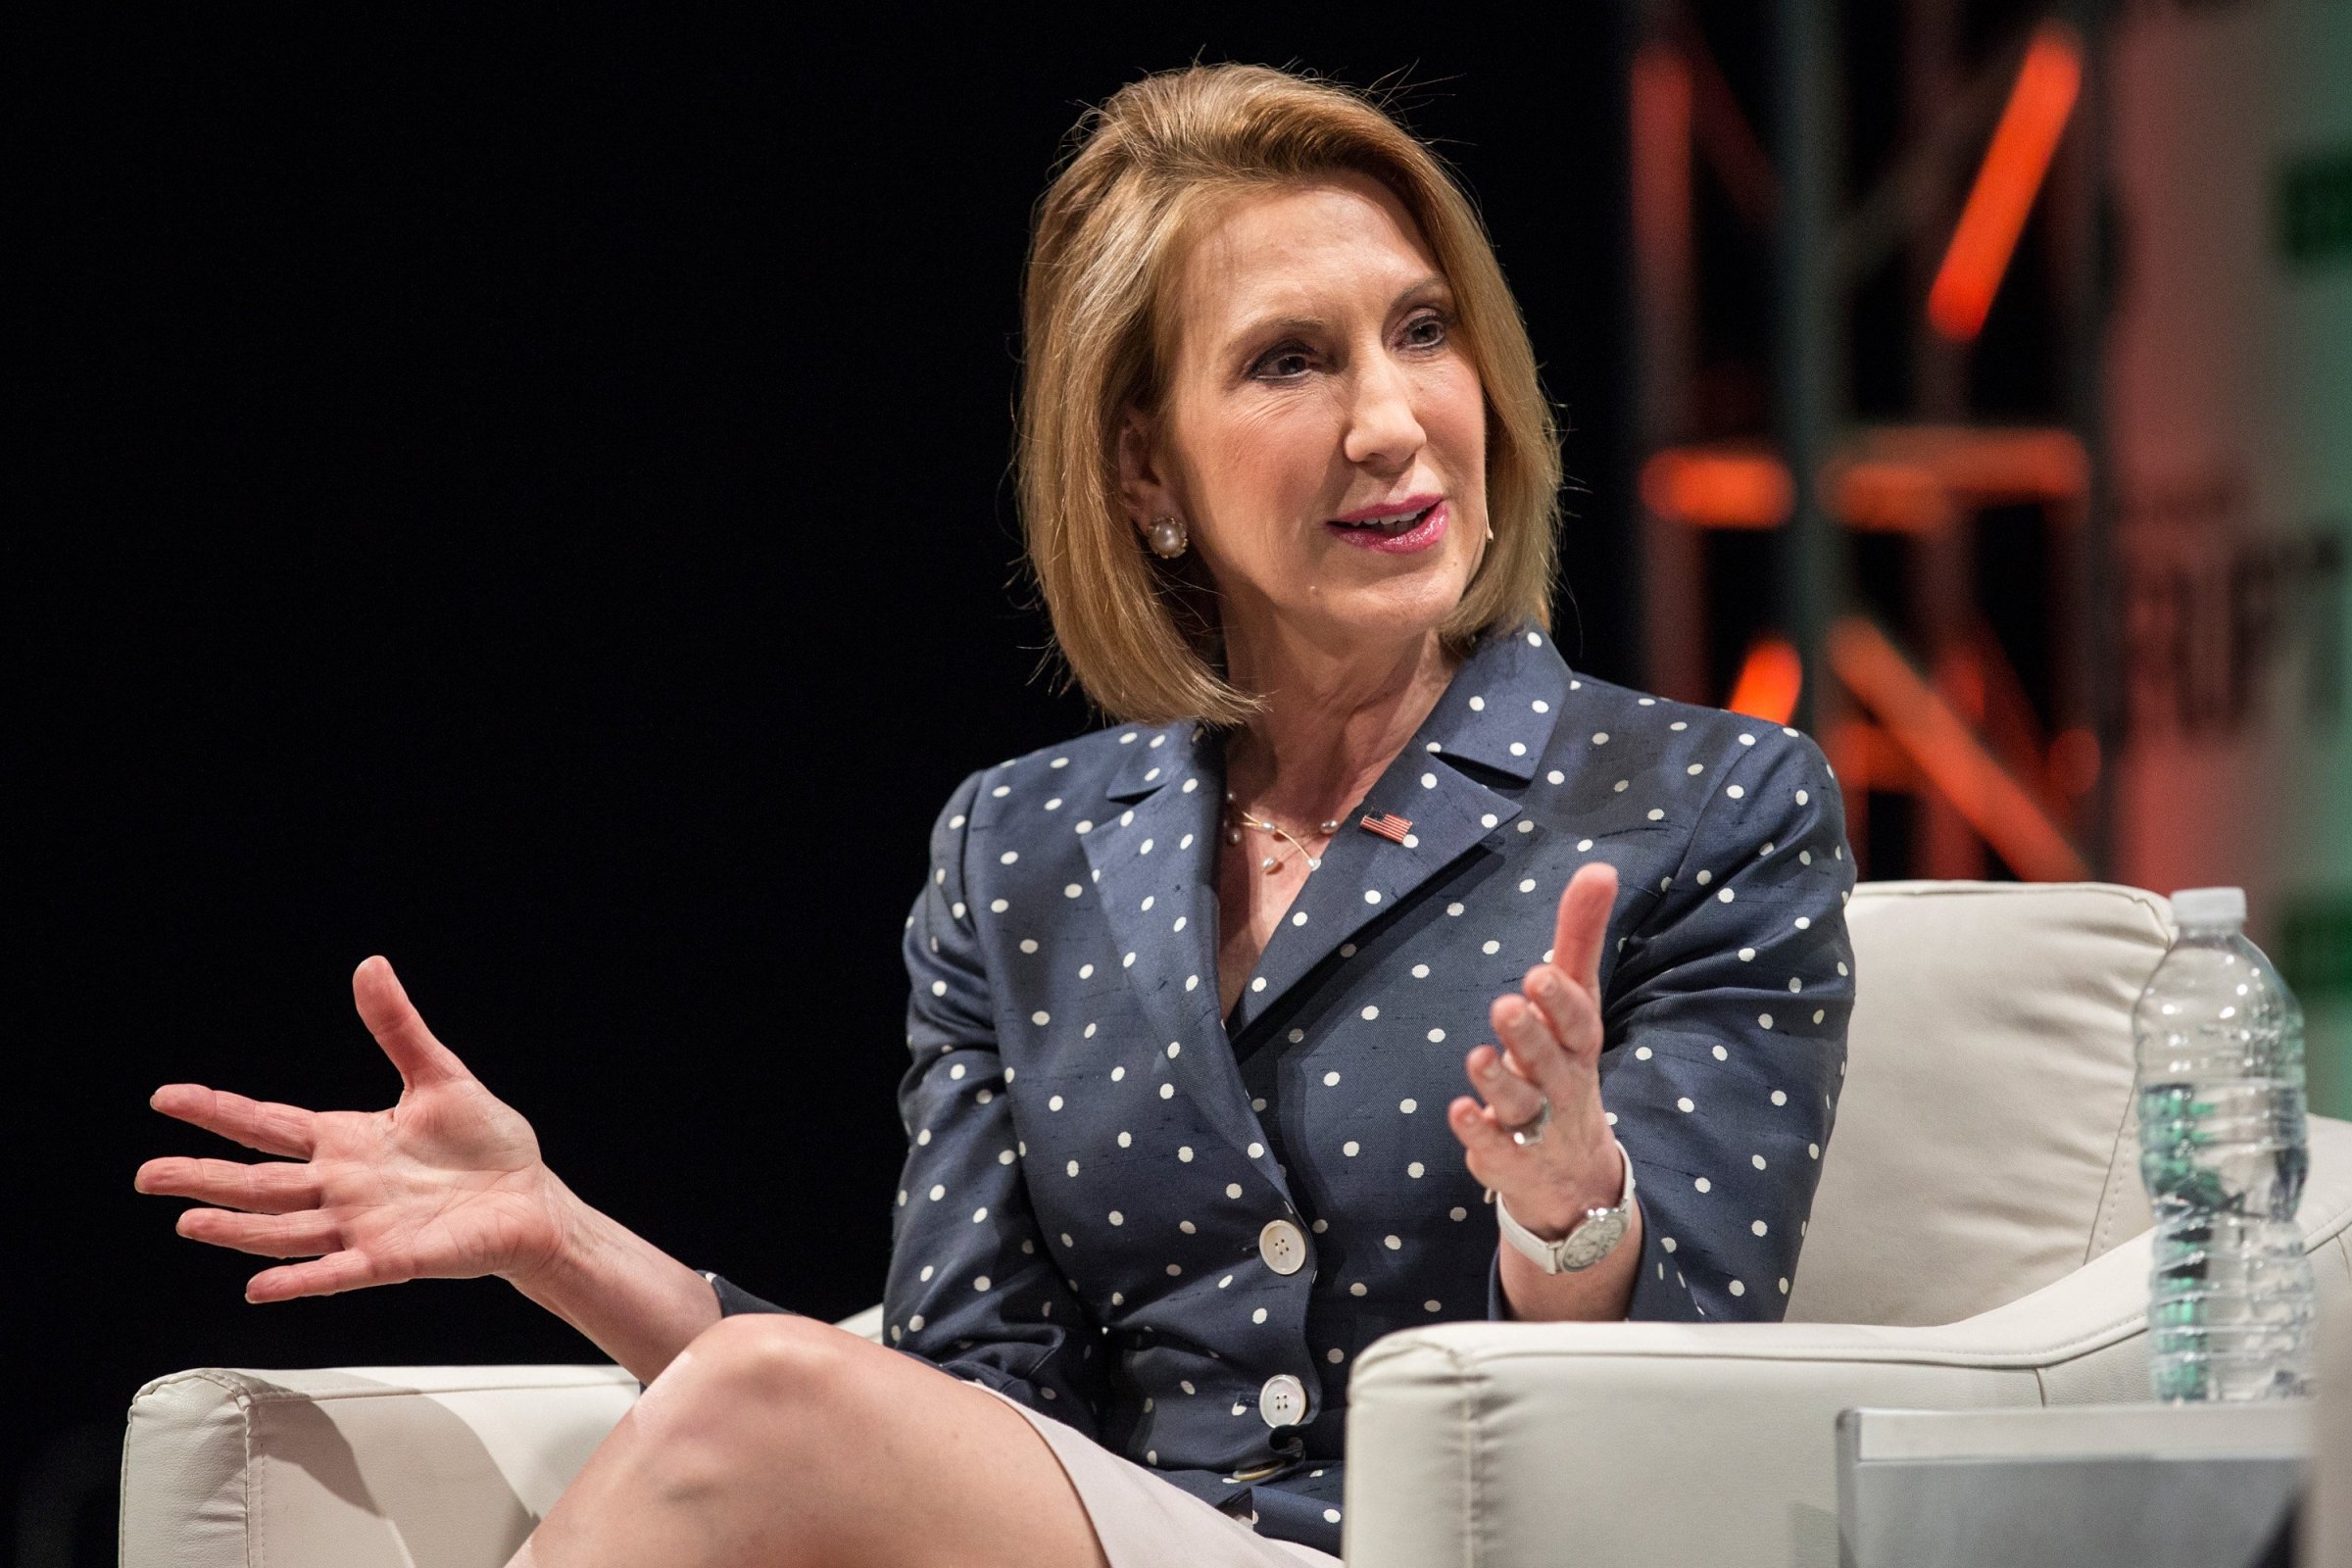 Republican presidential hopeful Carly Fiorina speaks at TechCrunchÕs Disrupt conference on May 5, 2015 in New York City.